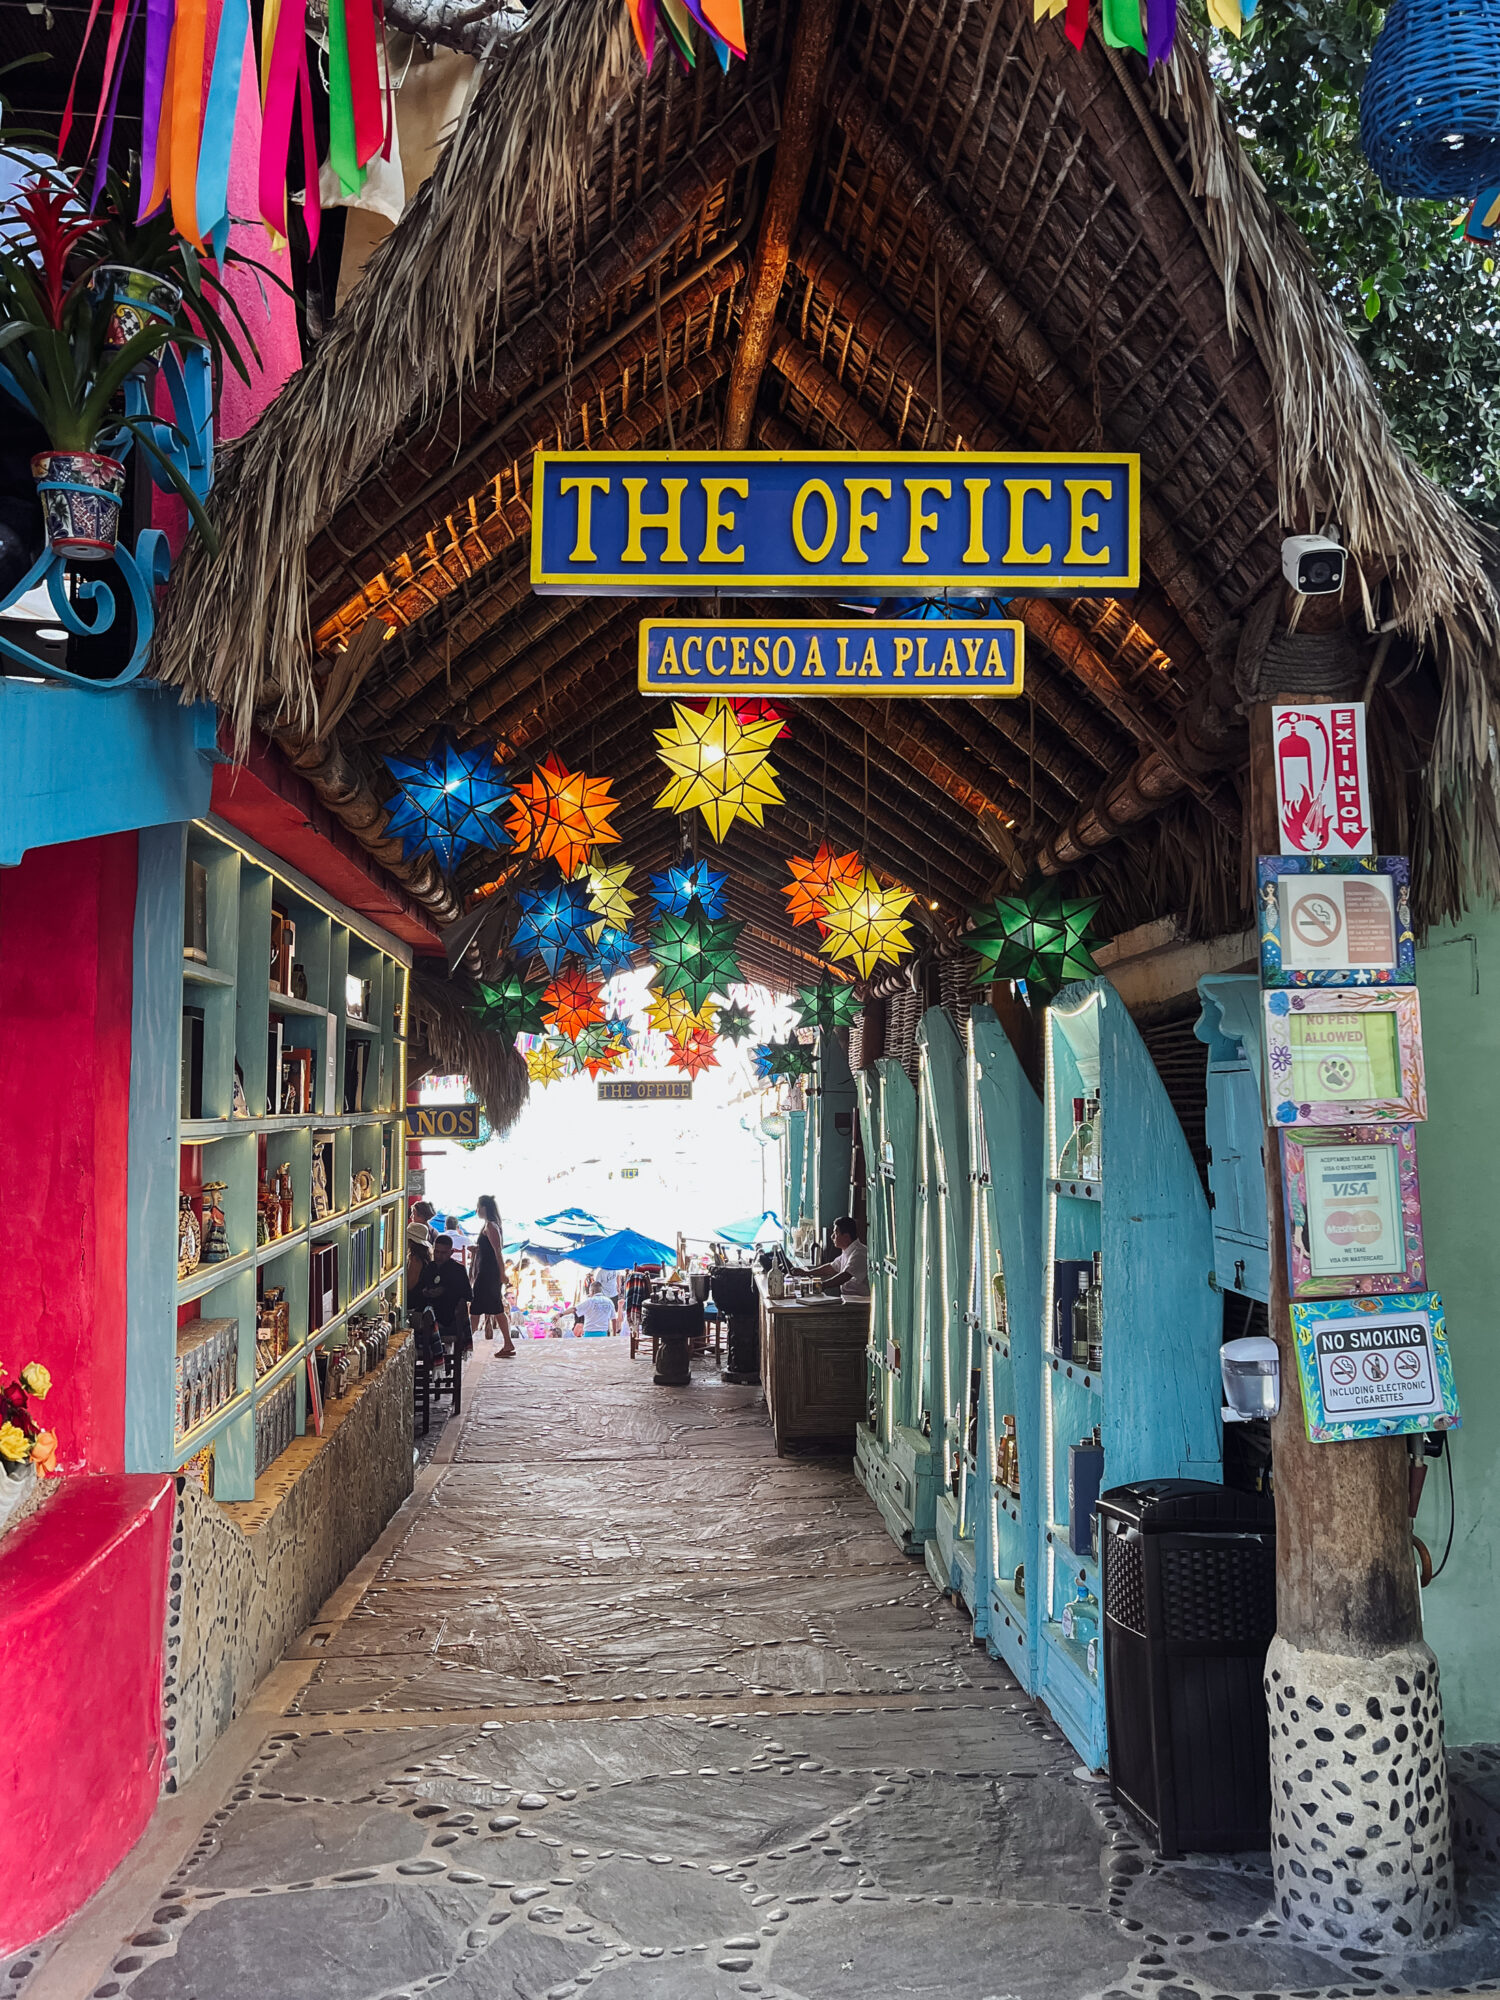 the office is a beach bar staple in cabo!